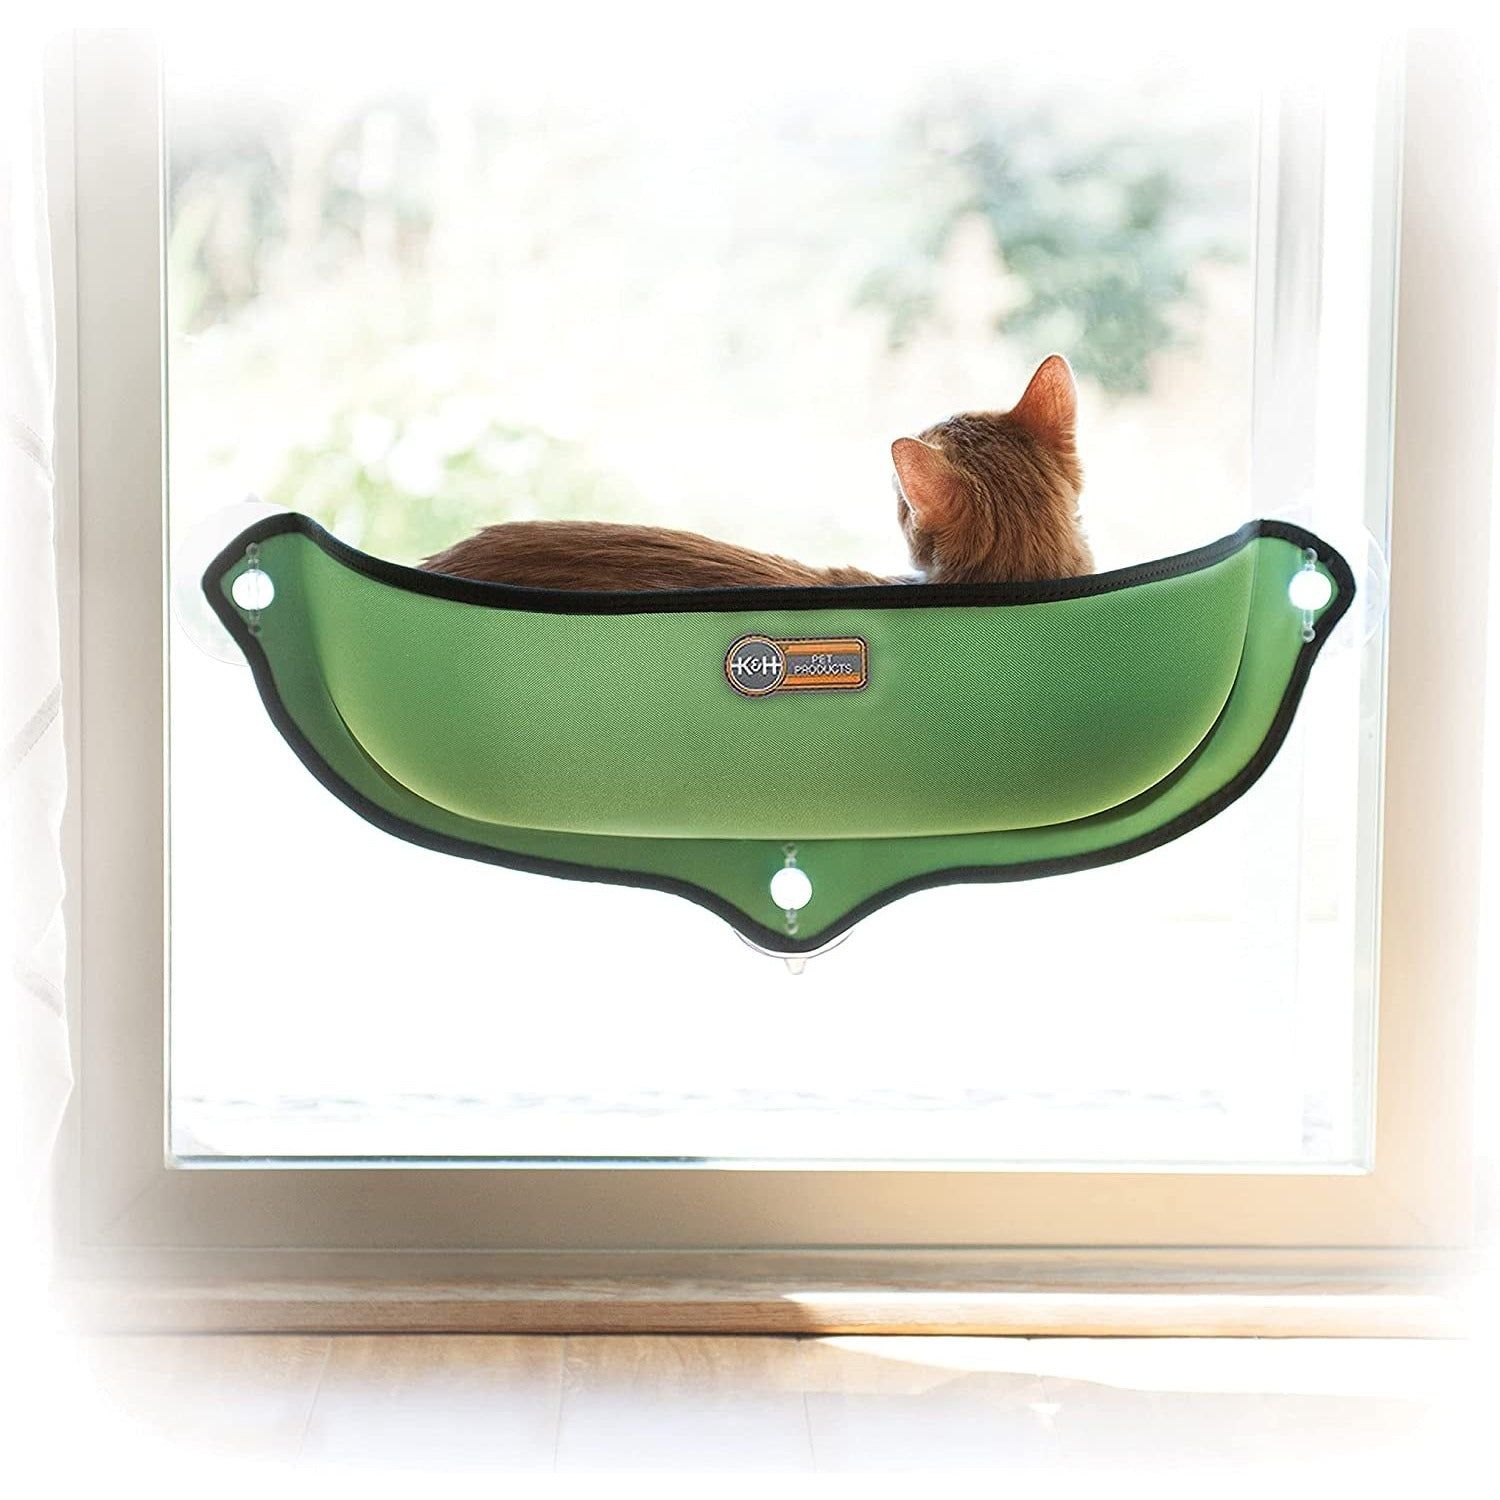 Mount Window Bed Kitty Sill - Mounts to Virtually Any Glass Window or Door